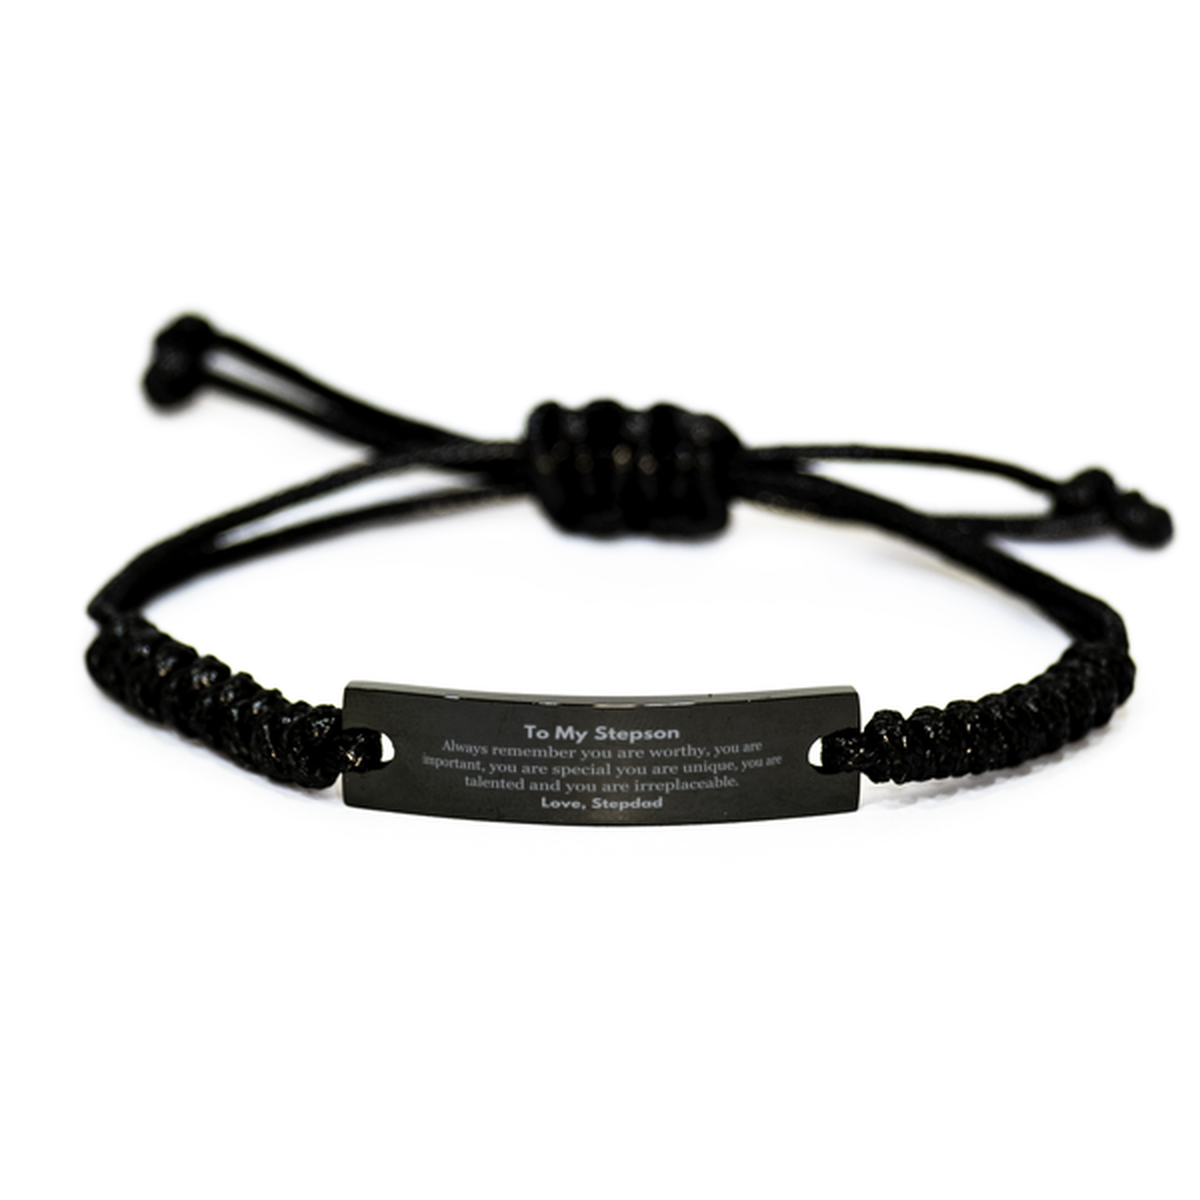 Stepson Birthday Gifts from Stepdad, Inspirational Black Rope Bracelet for Stepson Christmas Graduation Gifts for Stepson Always remember you are worthy, you are important. Love, Stepdad